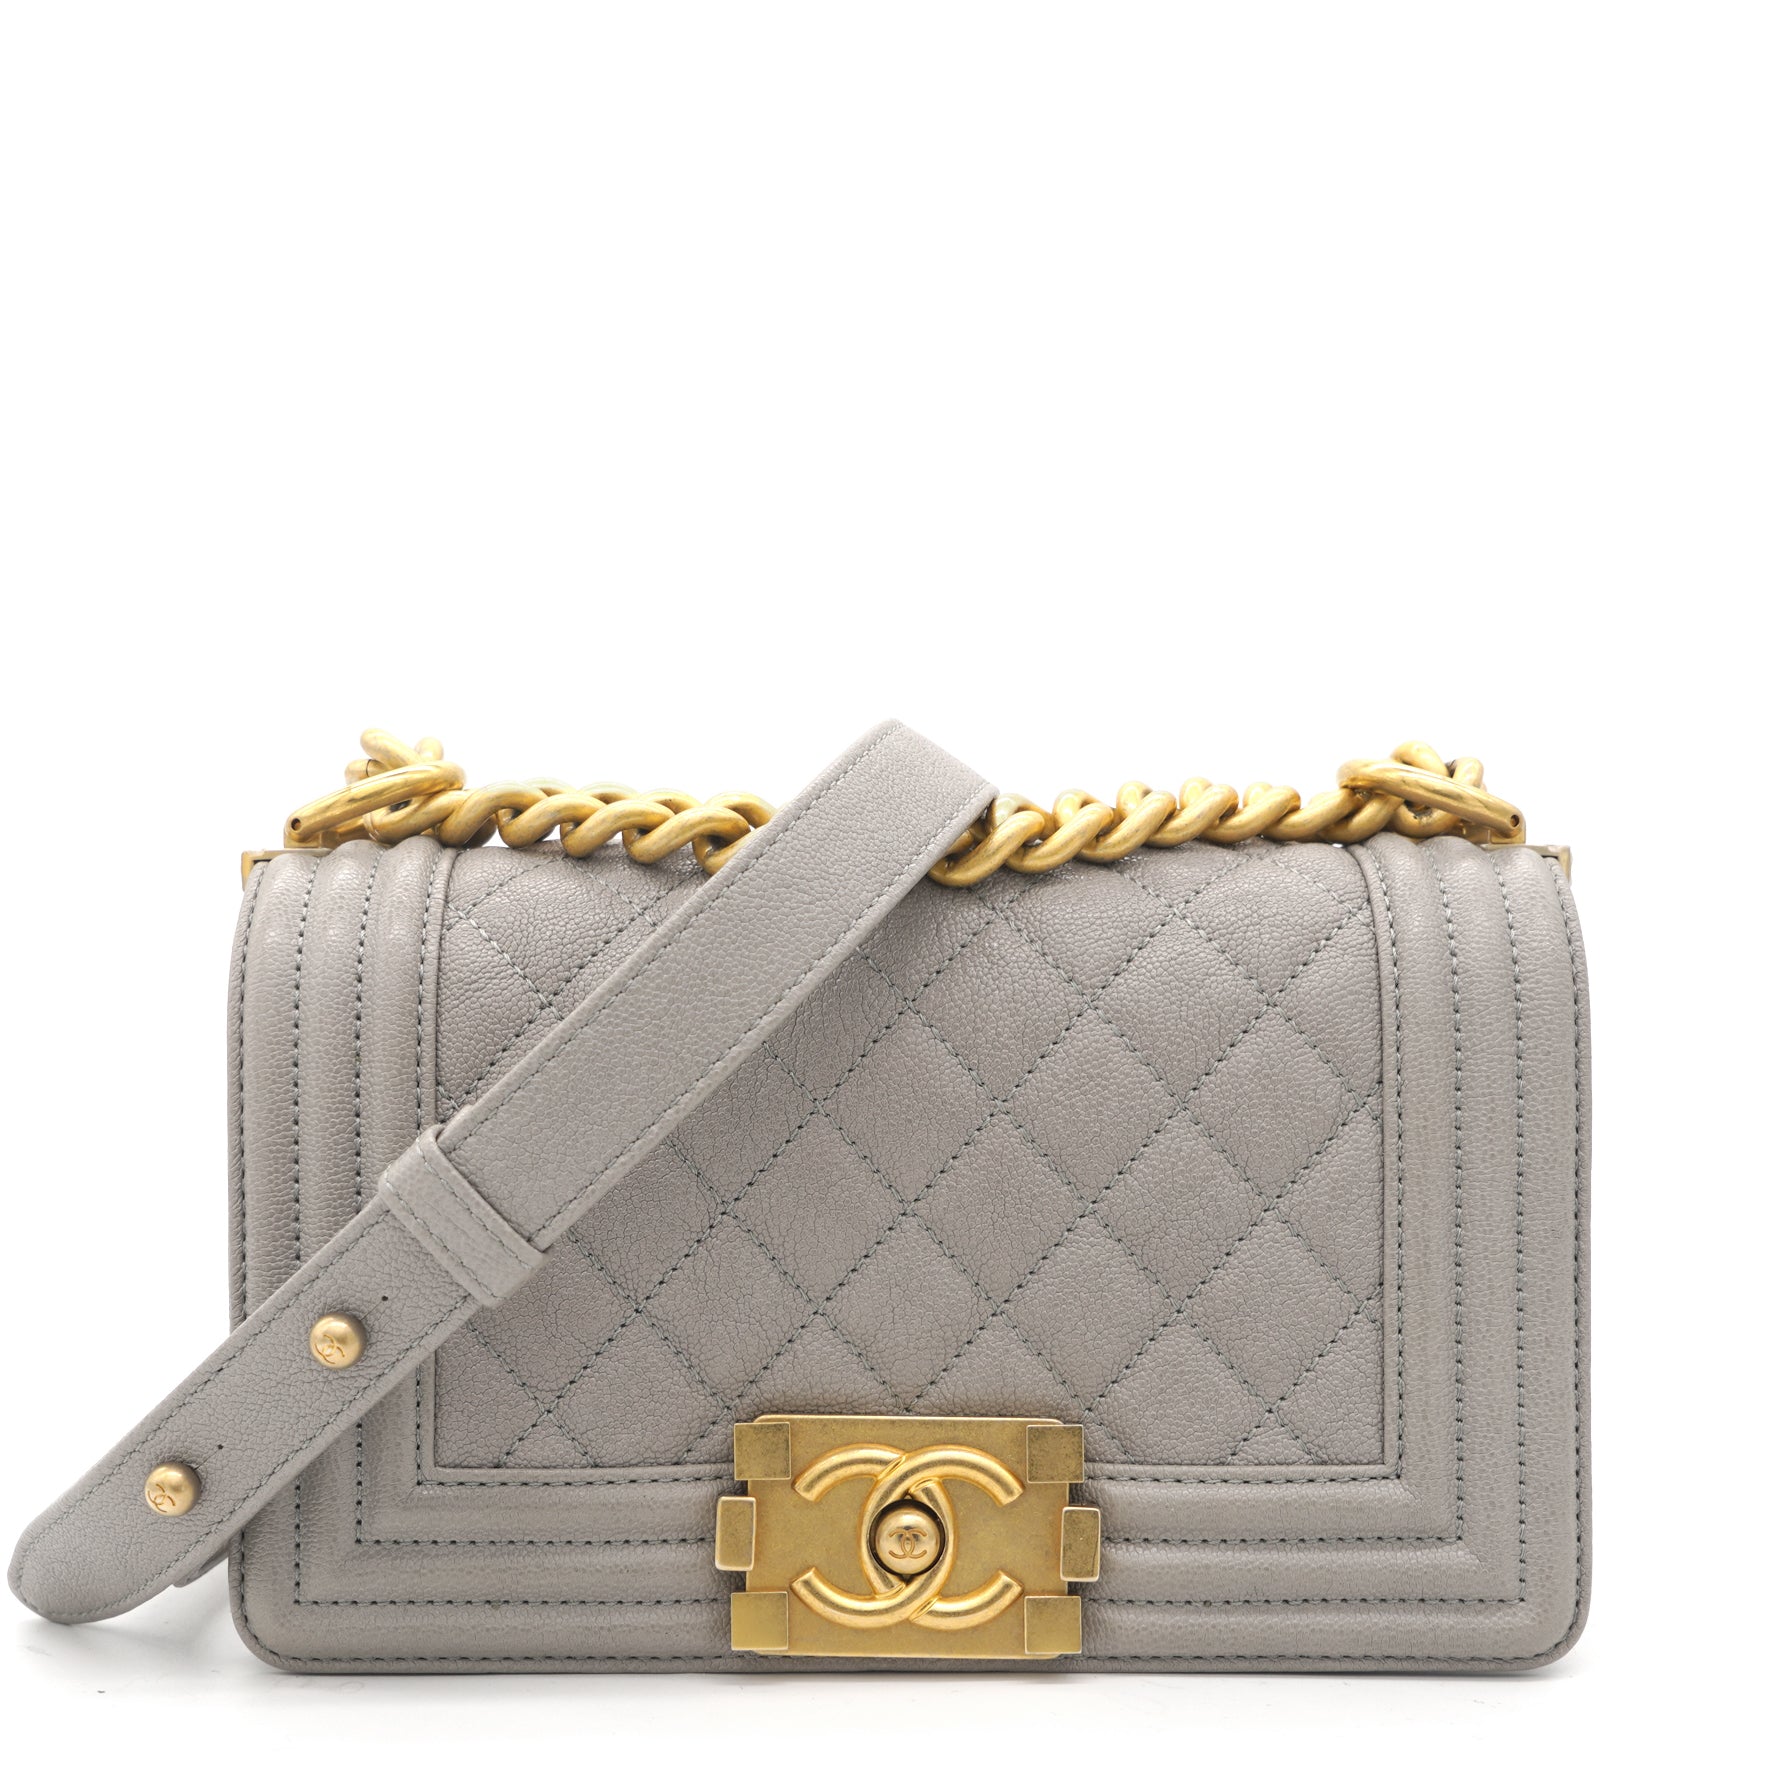 CHANEL LIGHT GRAY CAVIAR JUMBO CLASSIC DOUBLE FLAP BAG  Hebster Boutique